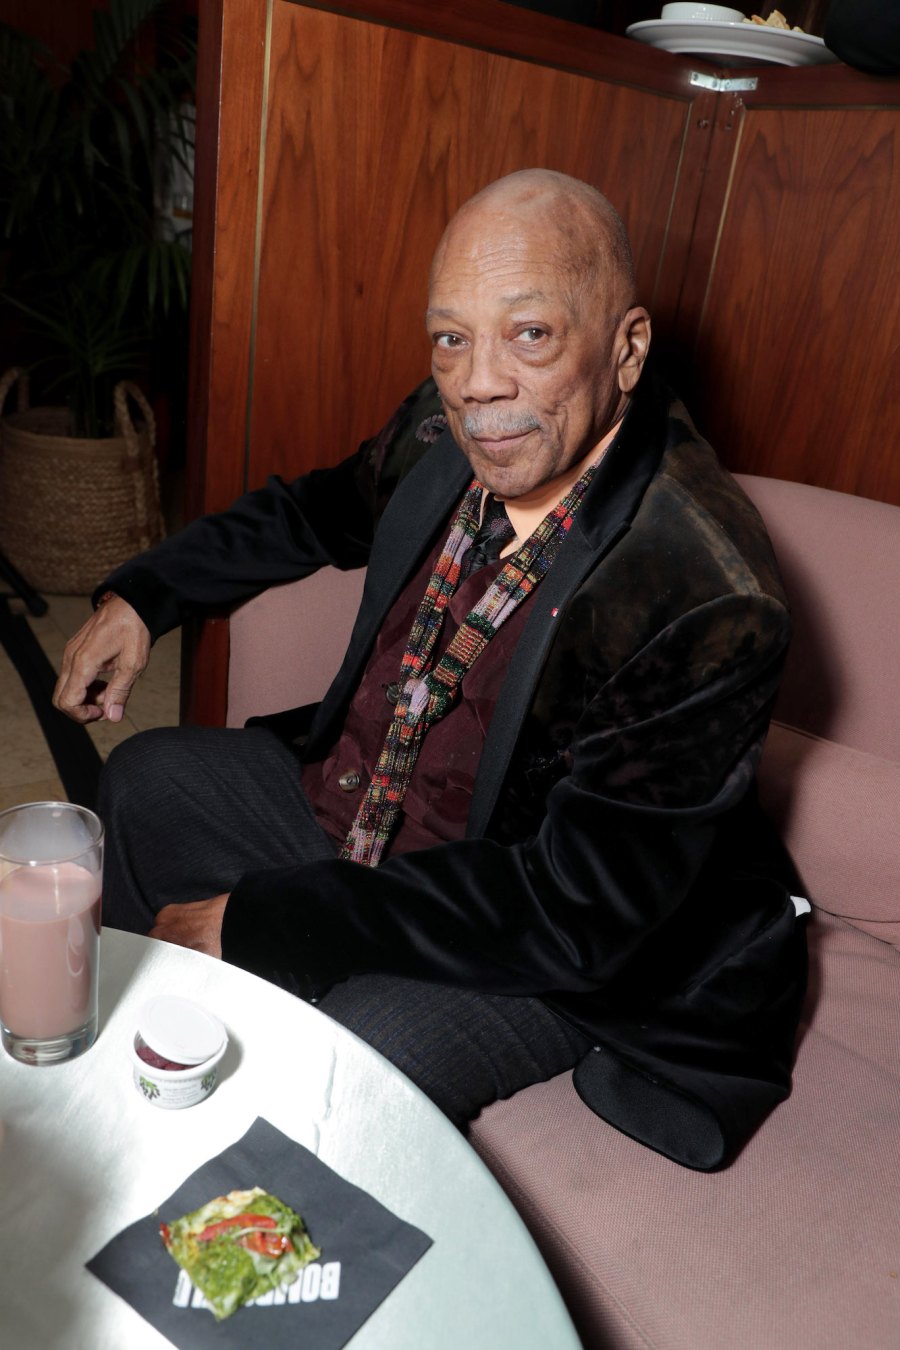 Quincy Jones Released From Hospital After Medical Emergency